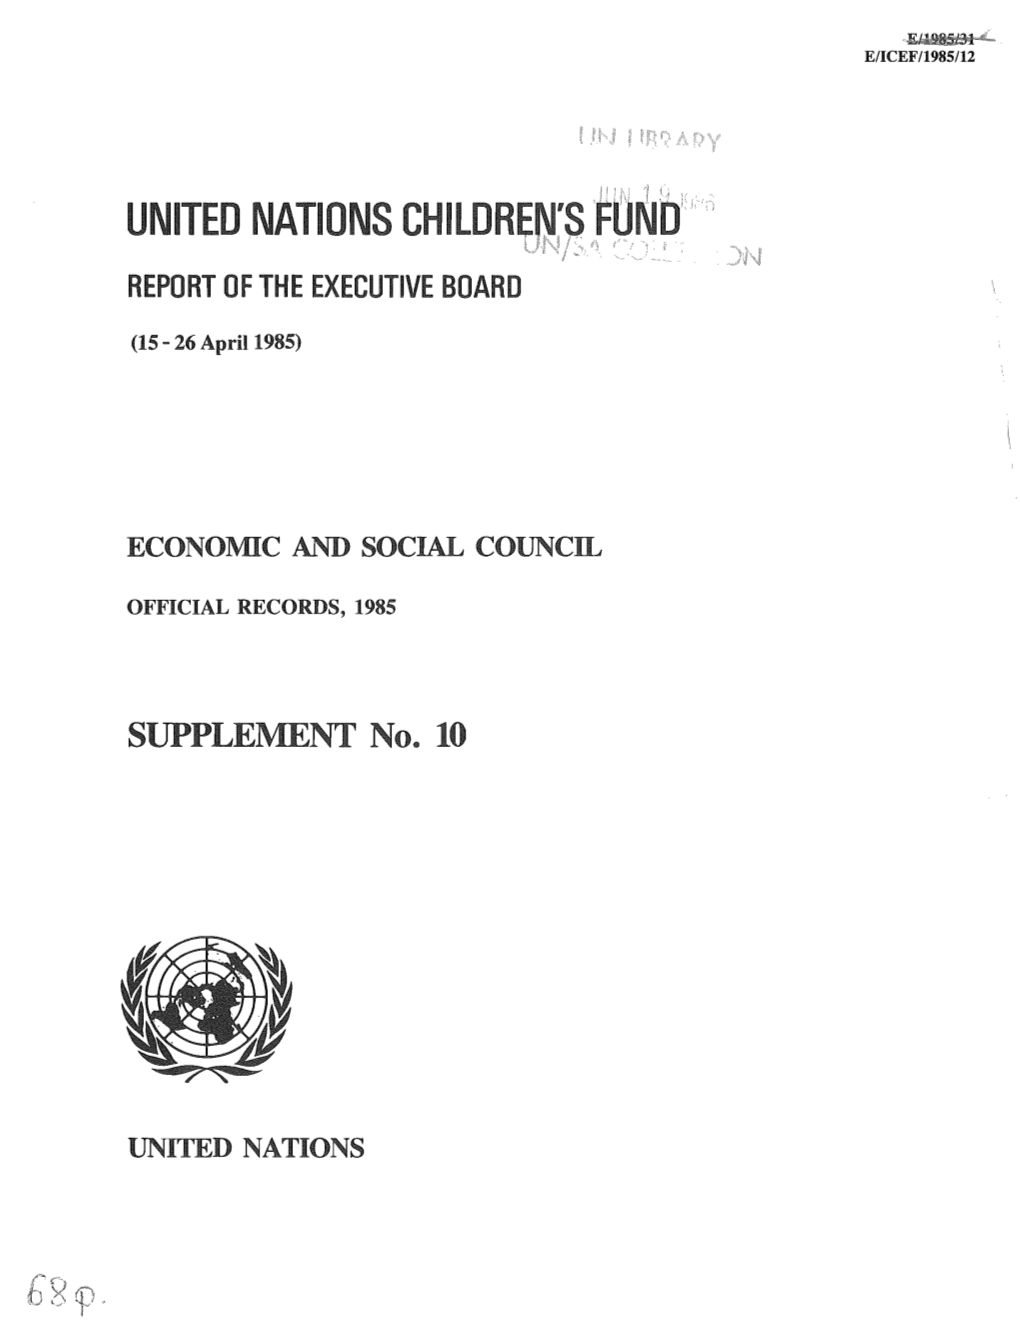 United Nations Child Report of the Executive Board